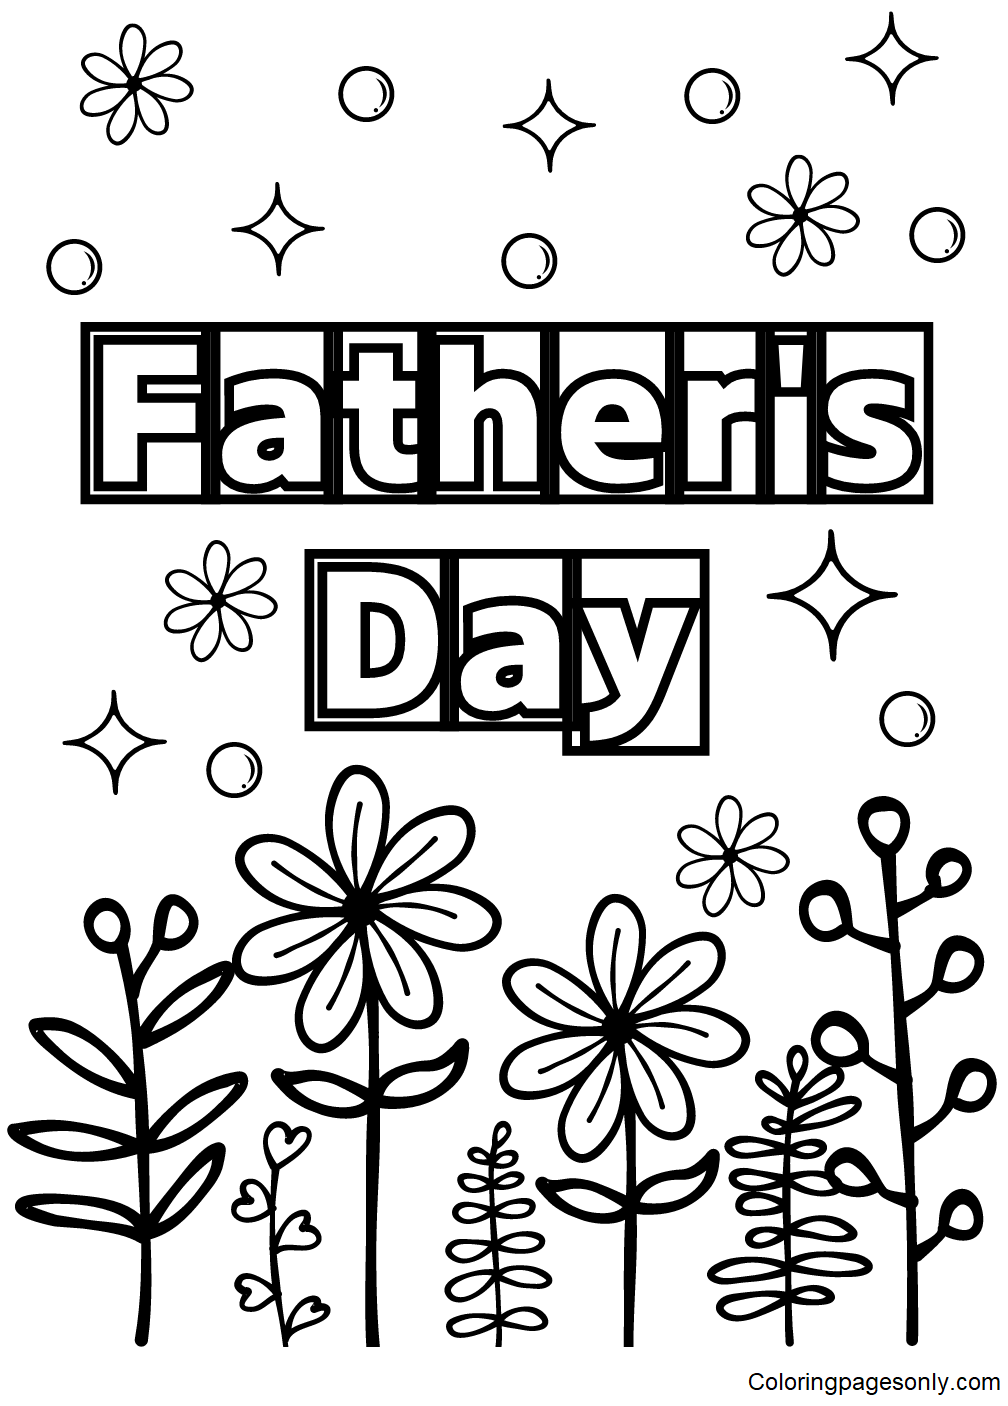 Fathers Day Picture Coloring Pages